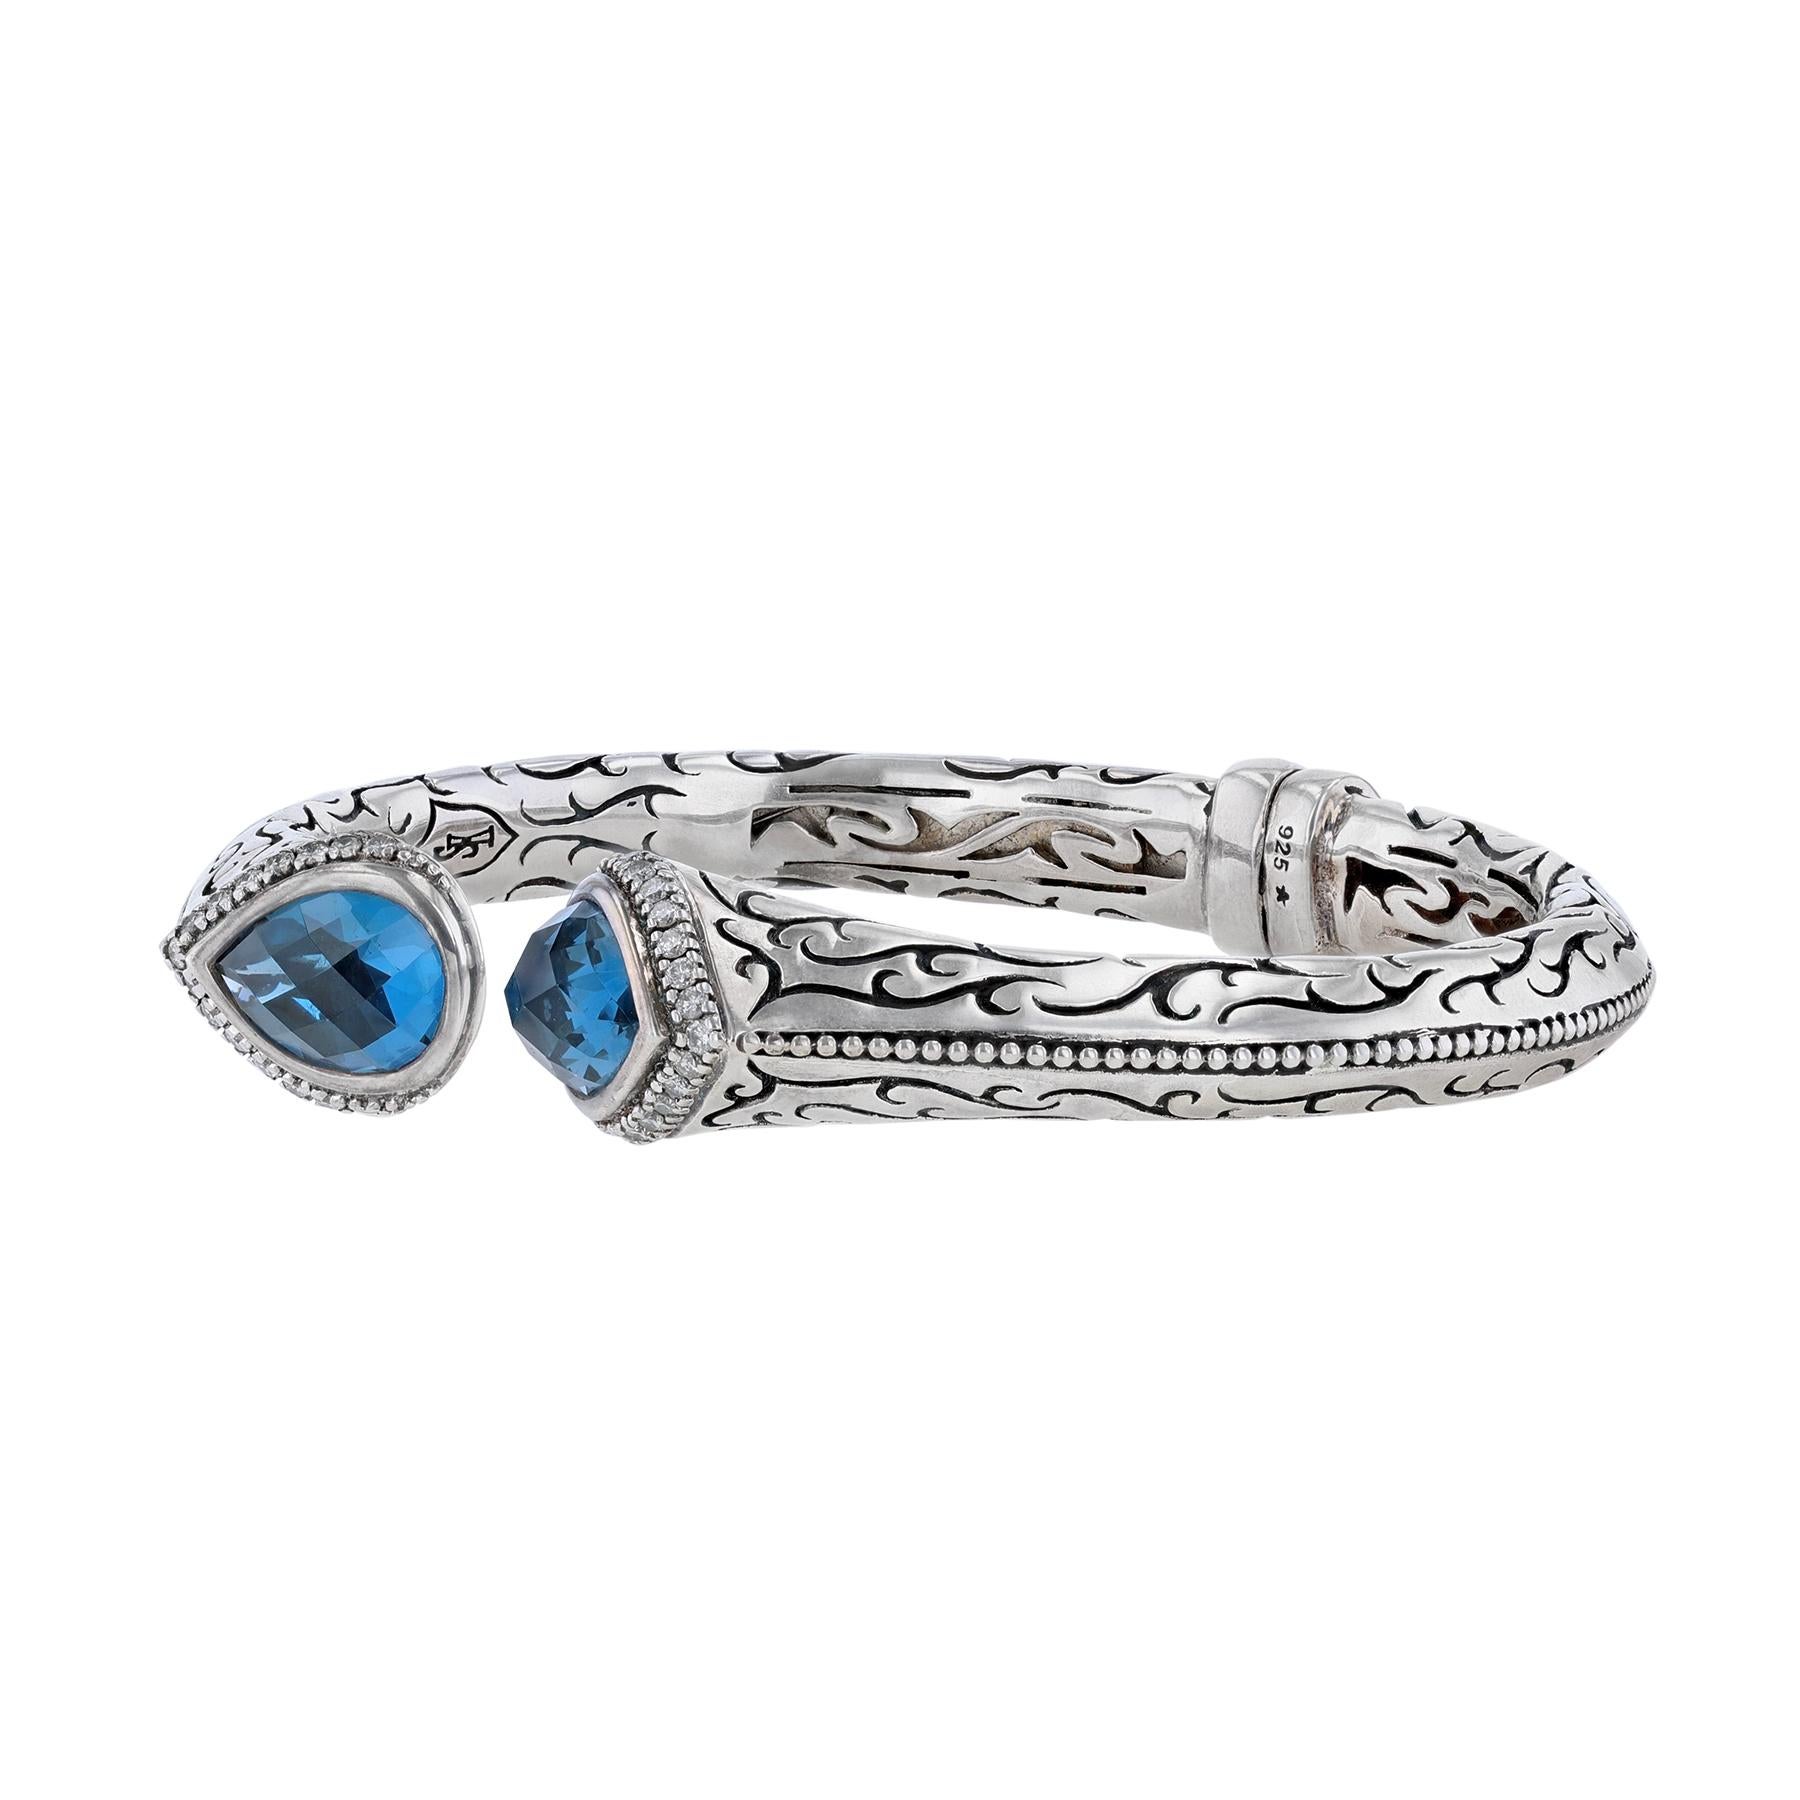 This cuff bracelet is made in sterling silver with 2 London blue topaz and diamonds weighing 0.45 carats.   

